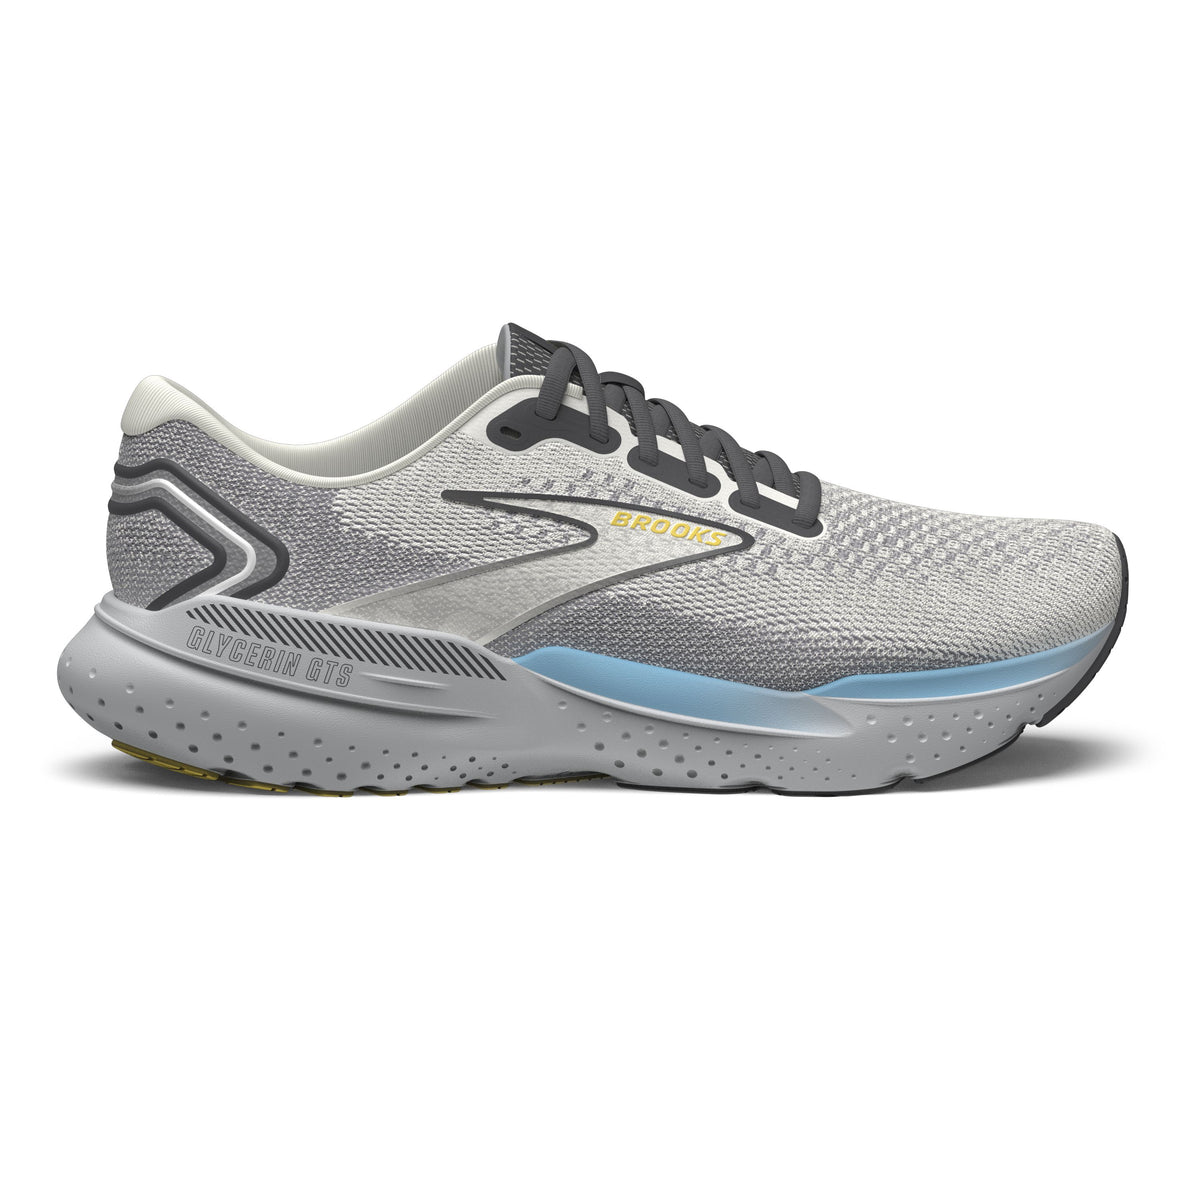 Brooks Glycerin GTS 21 Mens FOOTWEAR - Mens Stability Cushioned COCONUT/FORGED IRON/YELLOW